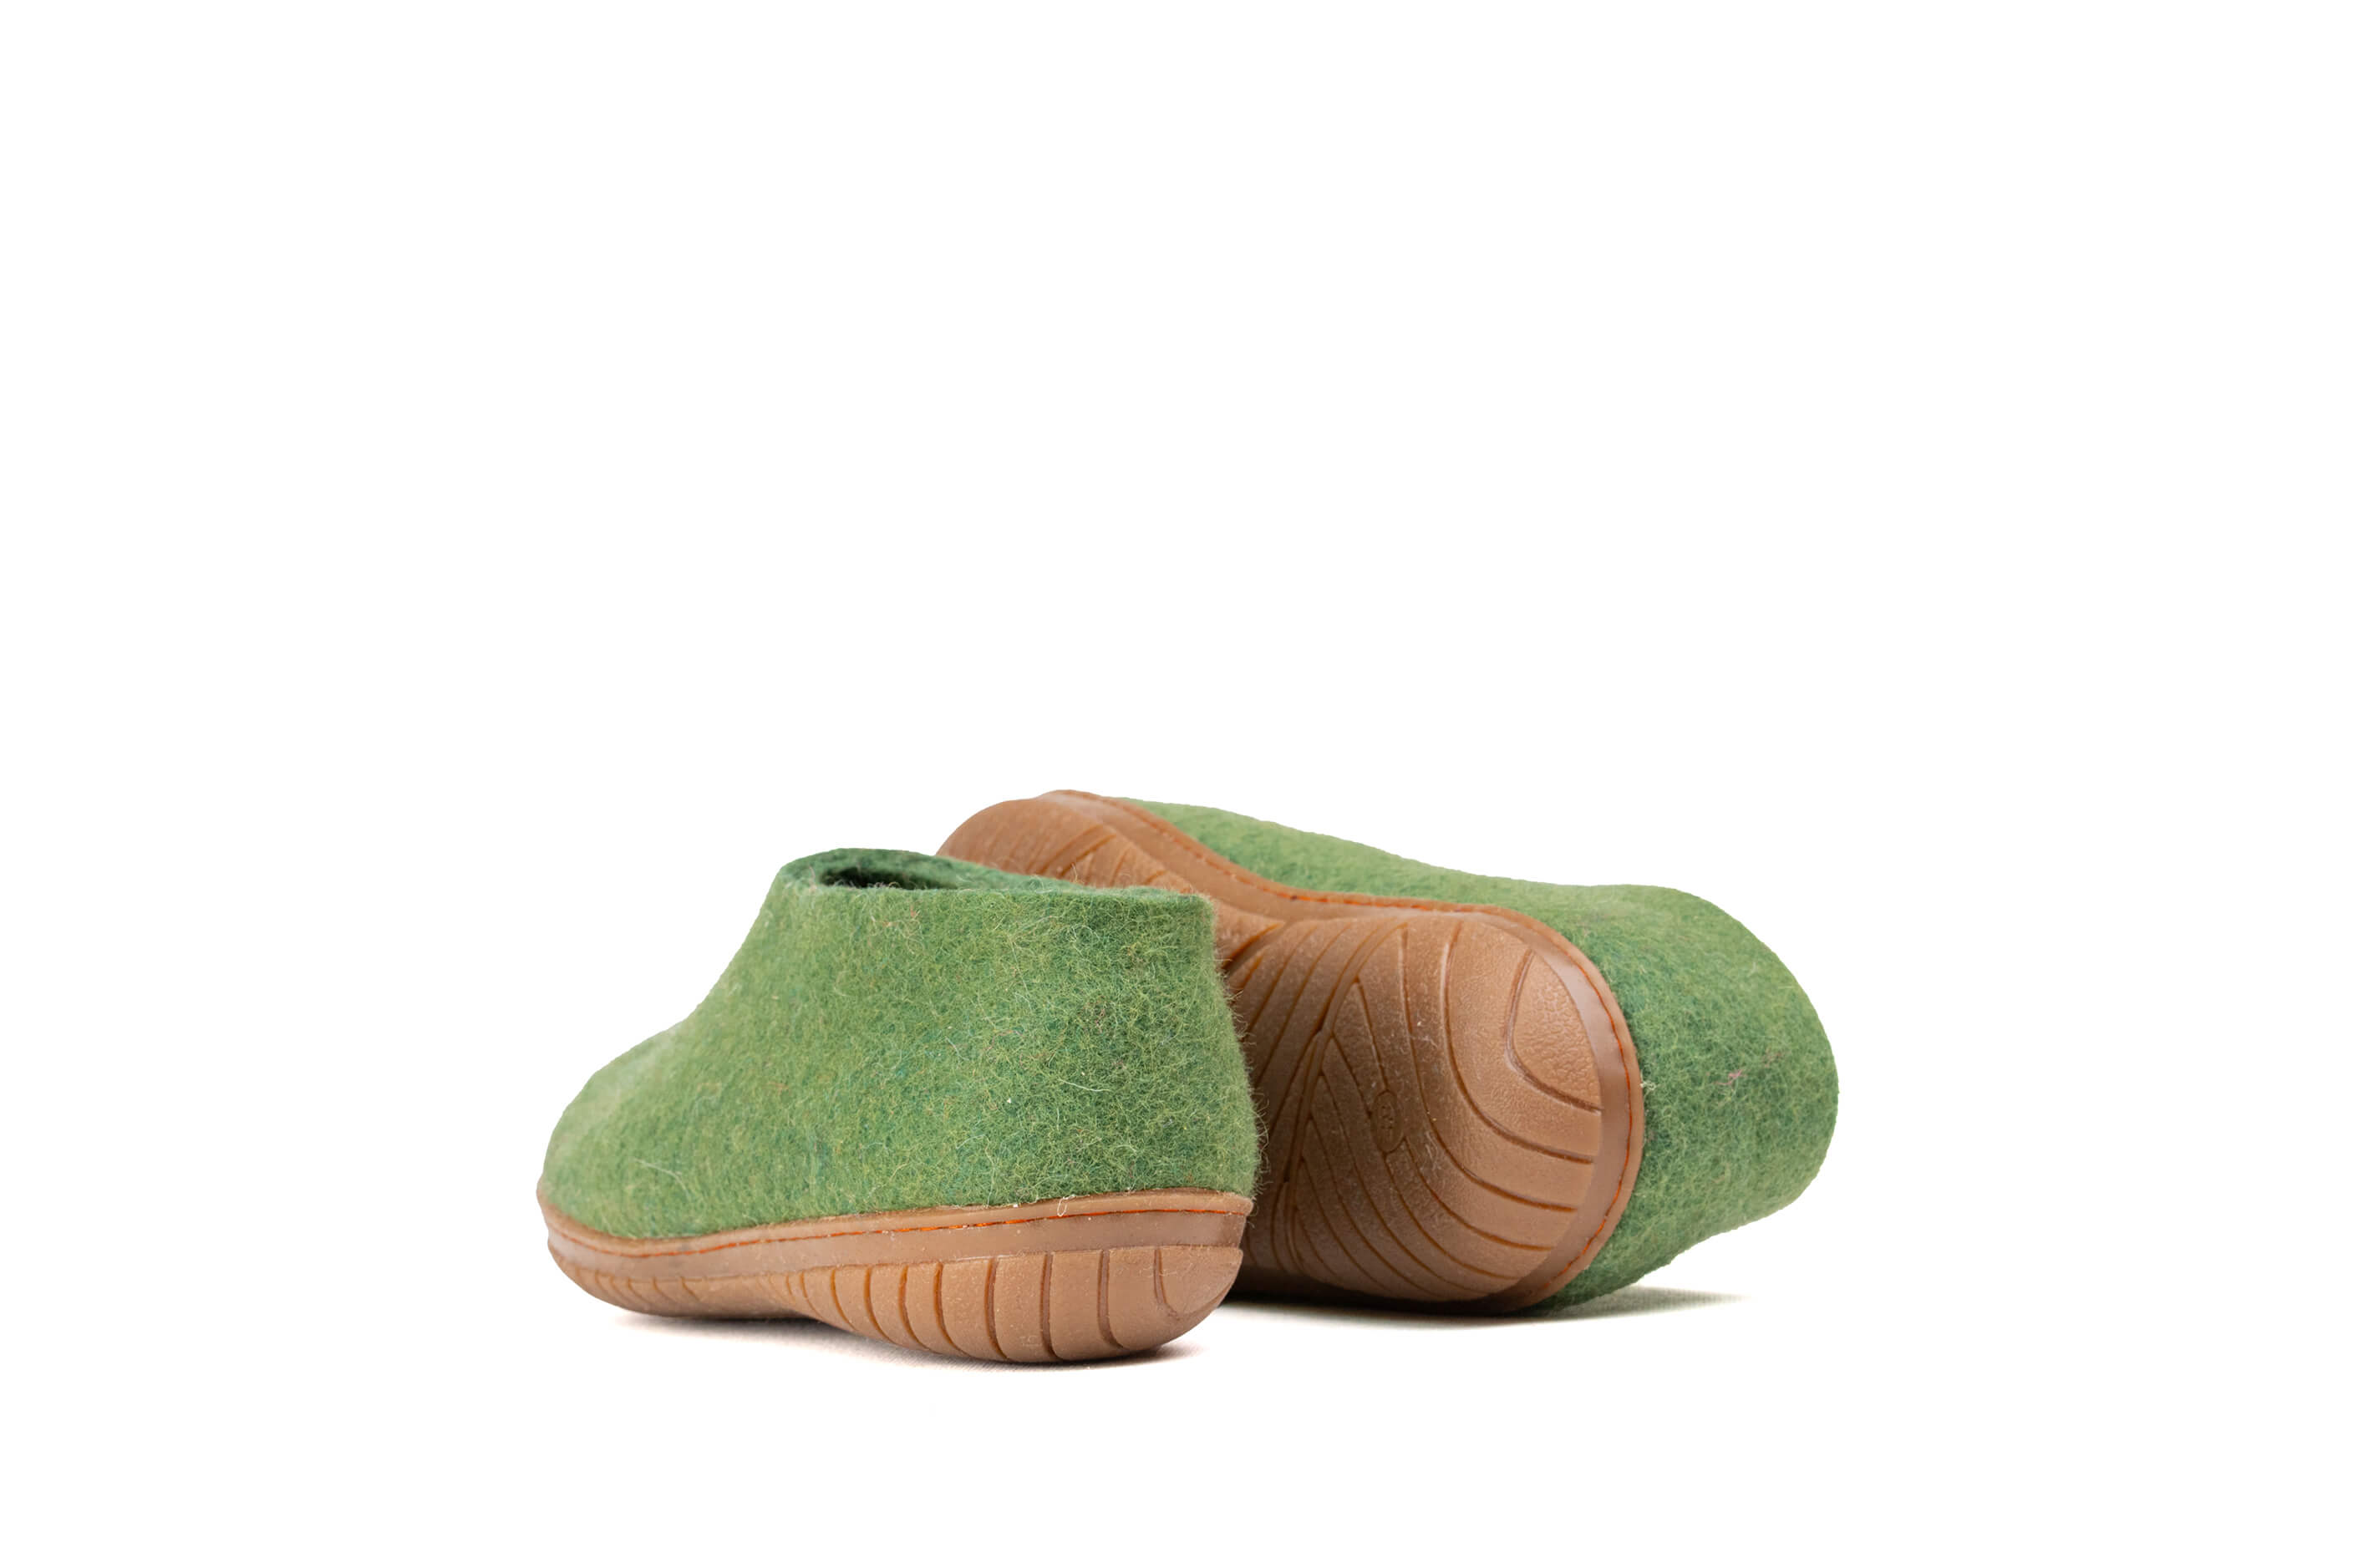 Outdoor Shoes With Rubber Sole - Green - Woollyes